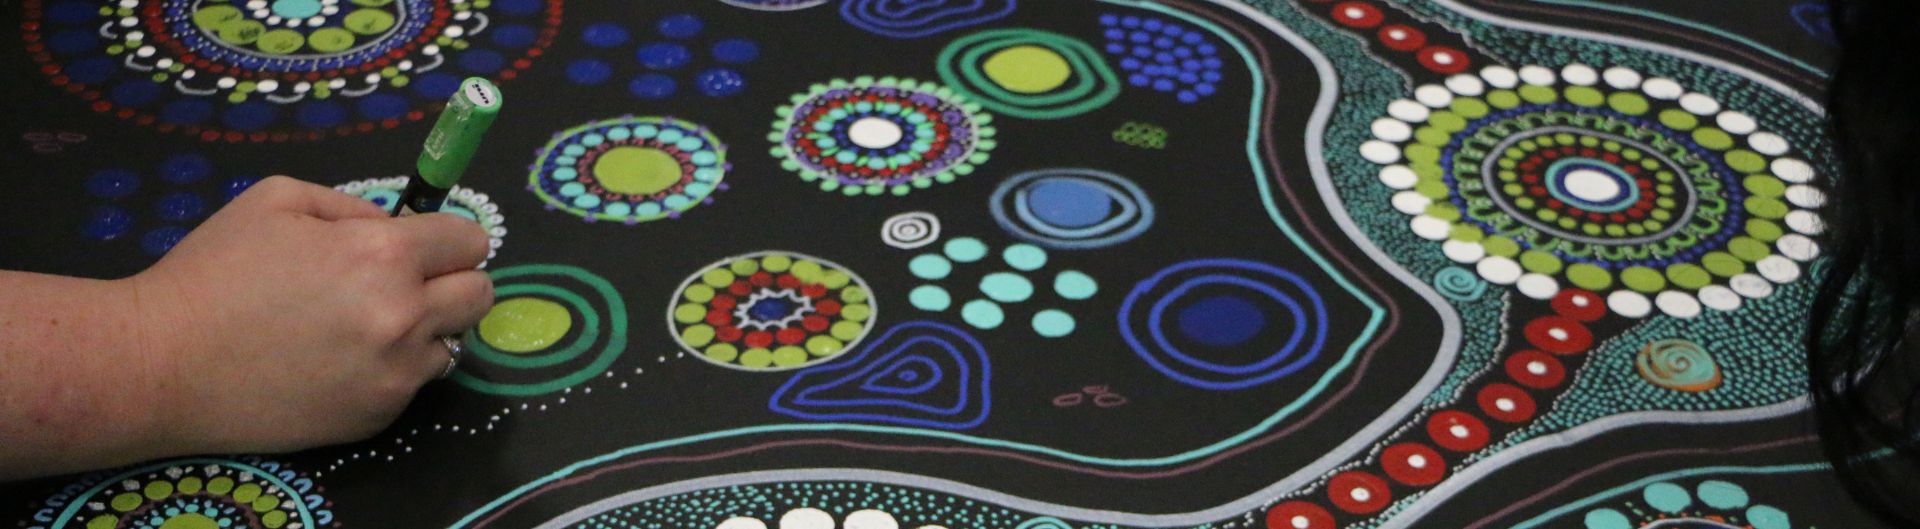 Connections, a First Nations artwork made by ICC Sydney team members in collaboration with Dalmarri.